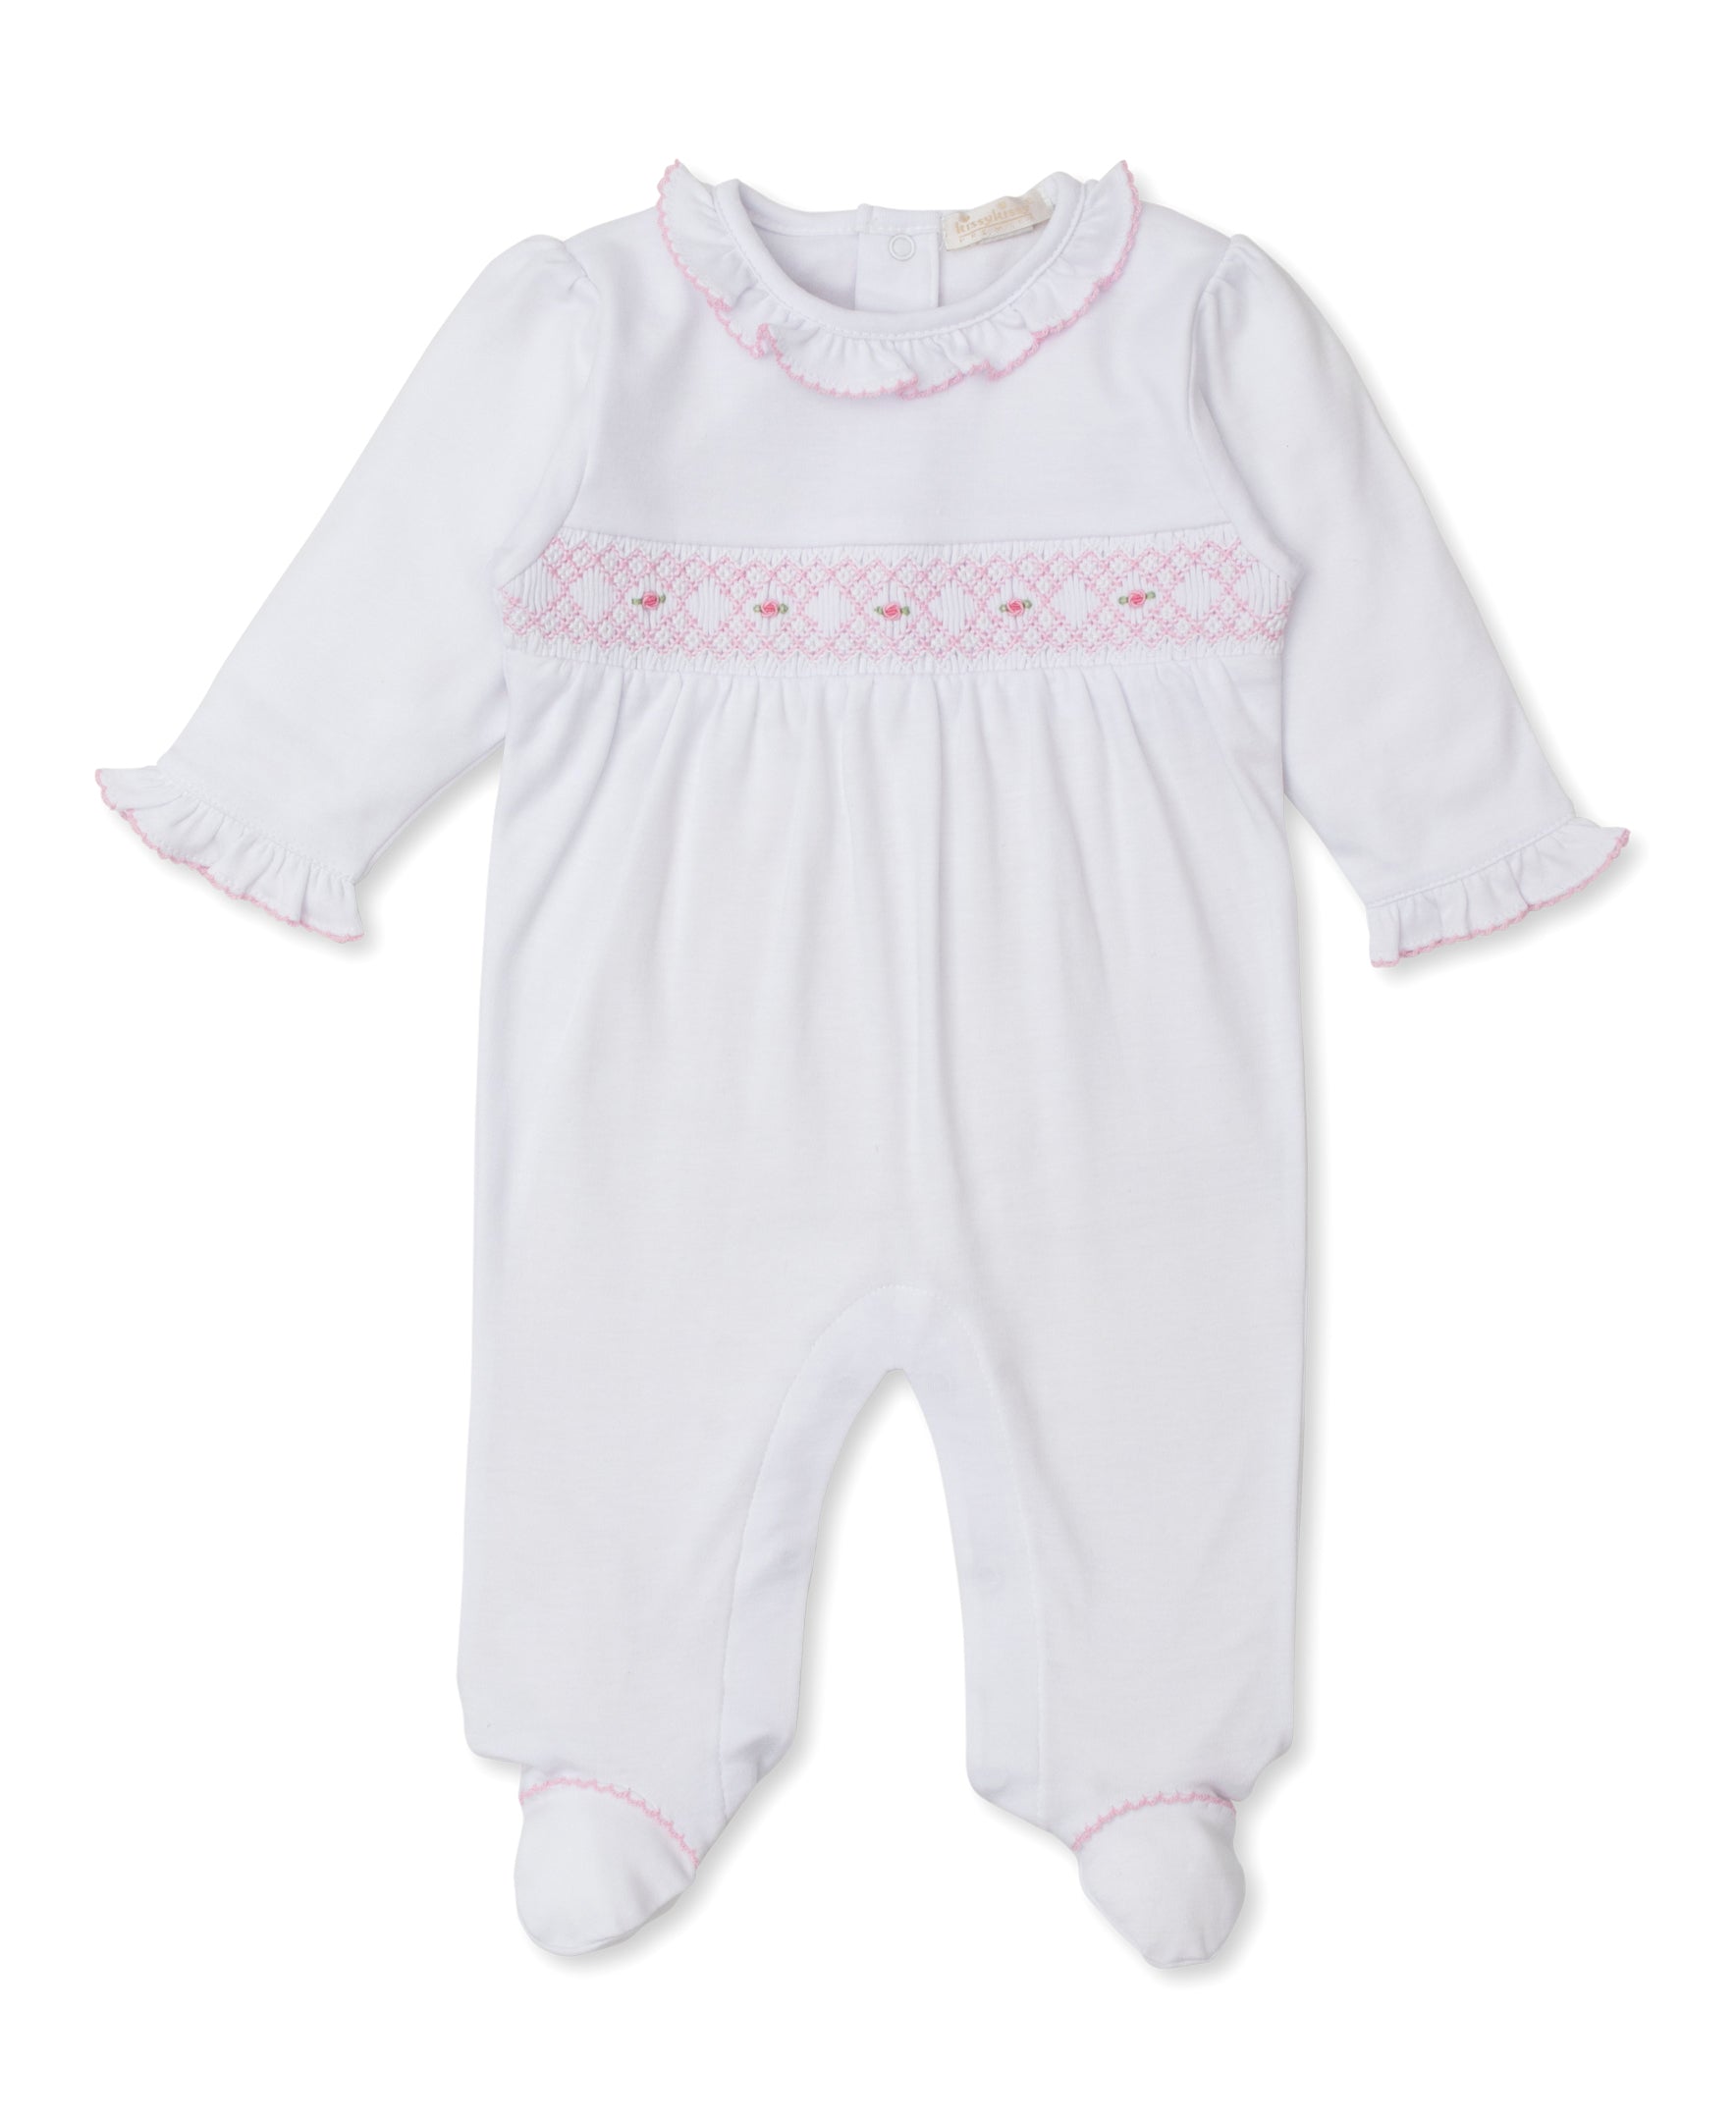 CLB Summer 24 White/Pink Hand Smocked Footie - Kissy Kissy